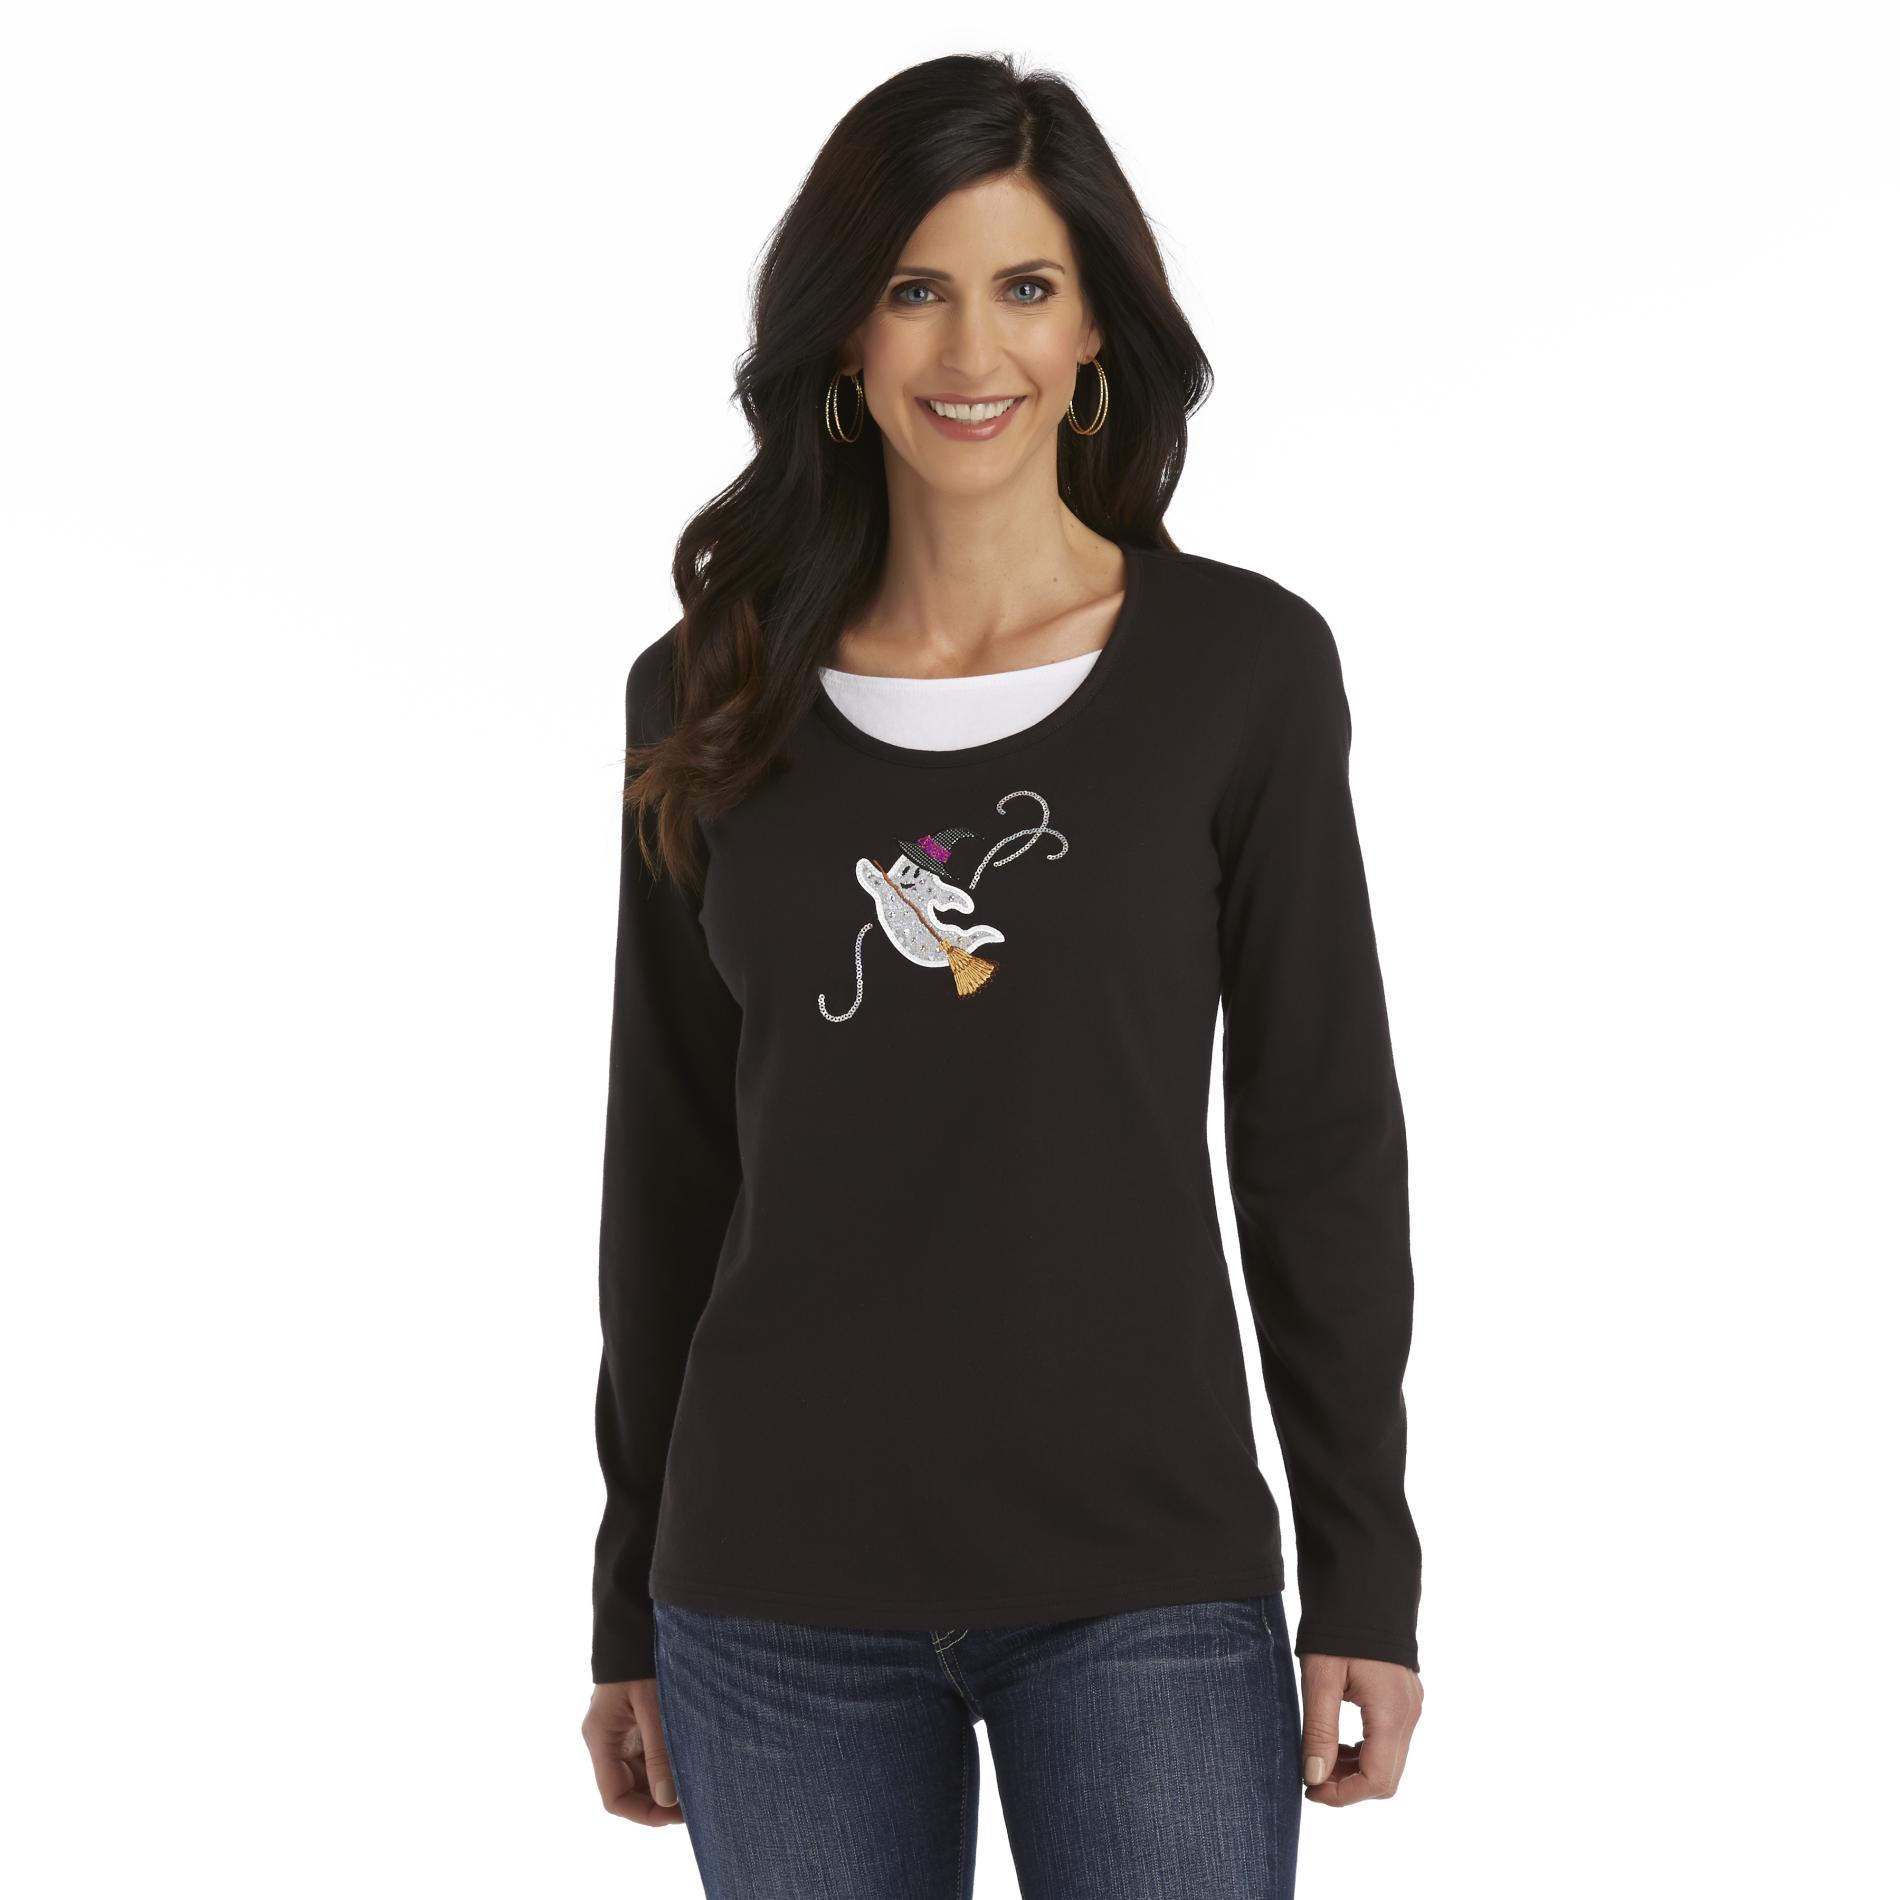 Holiday Editions Women's Applique Halloween T-Shirt - Ghost